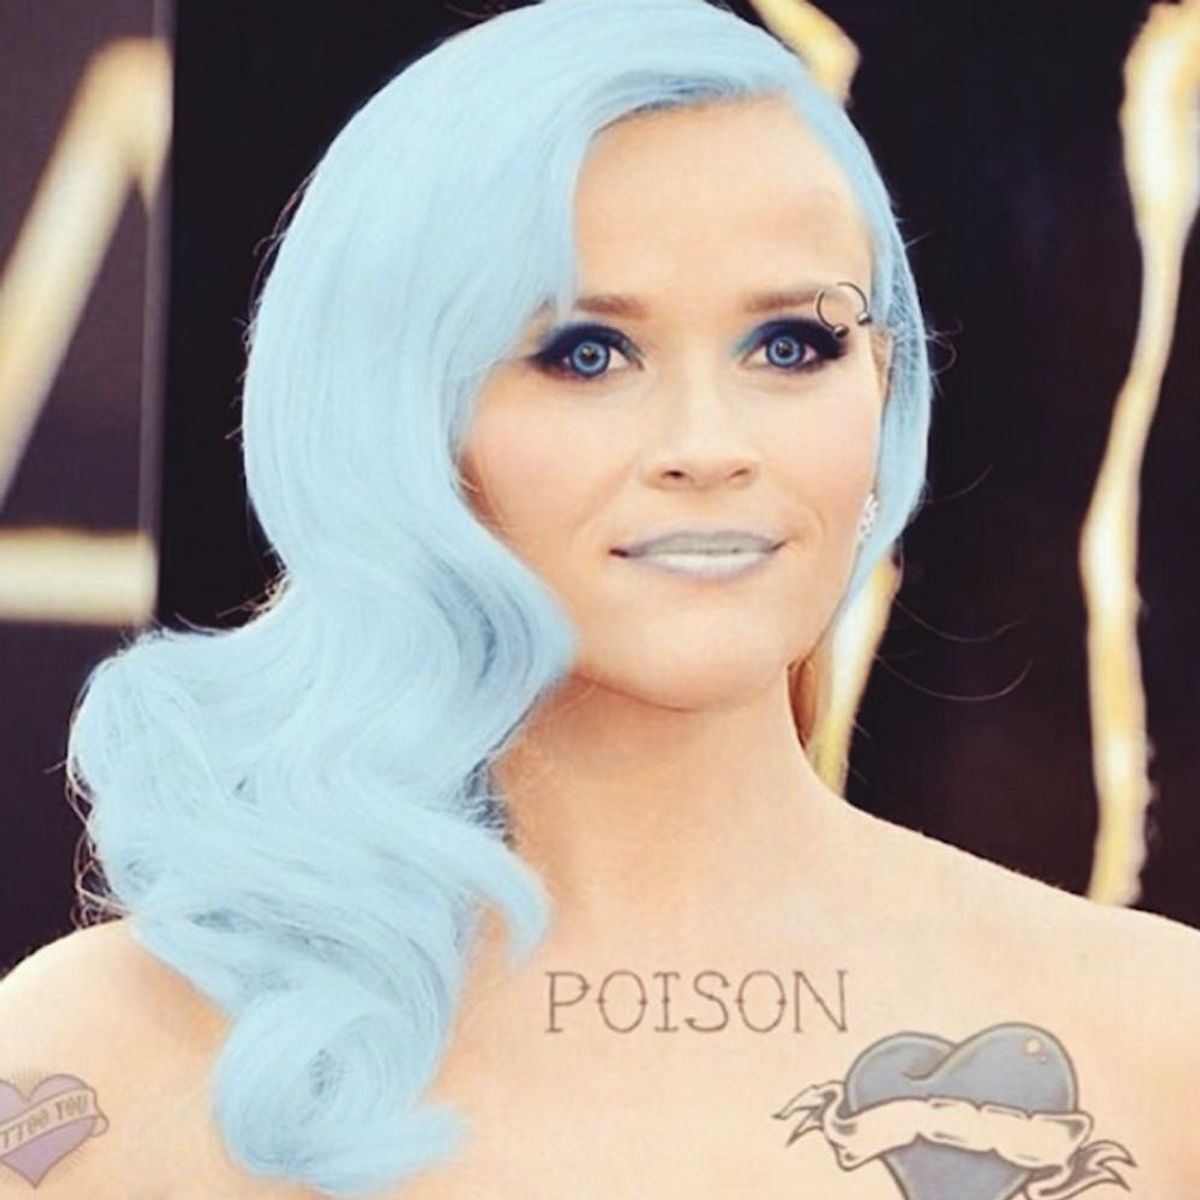 This Must-Follow Instagram Gives Your Favorite Celebs Serious Makeovers